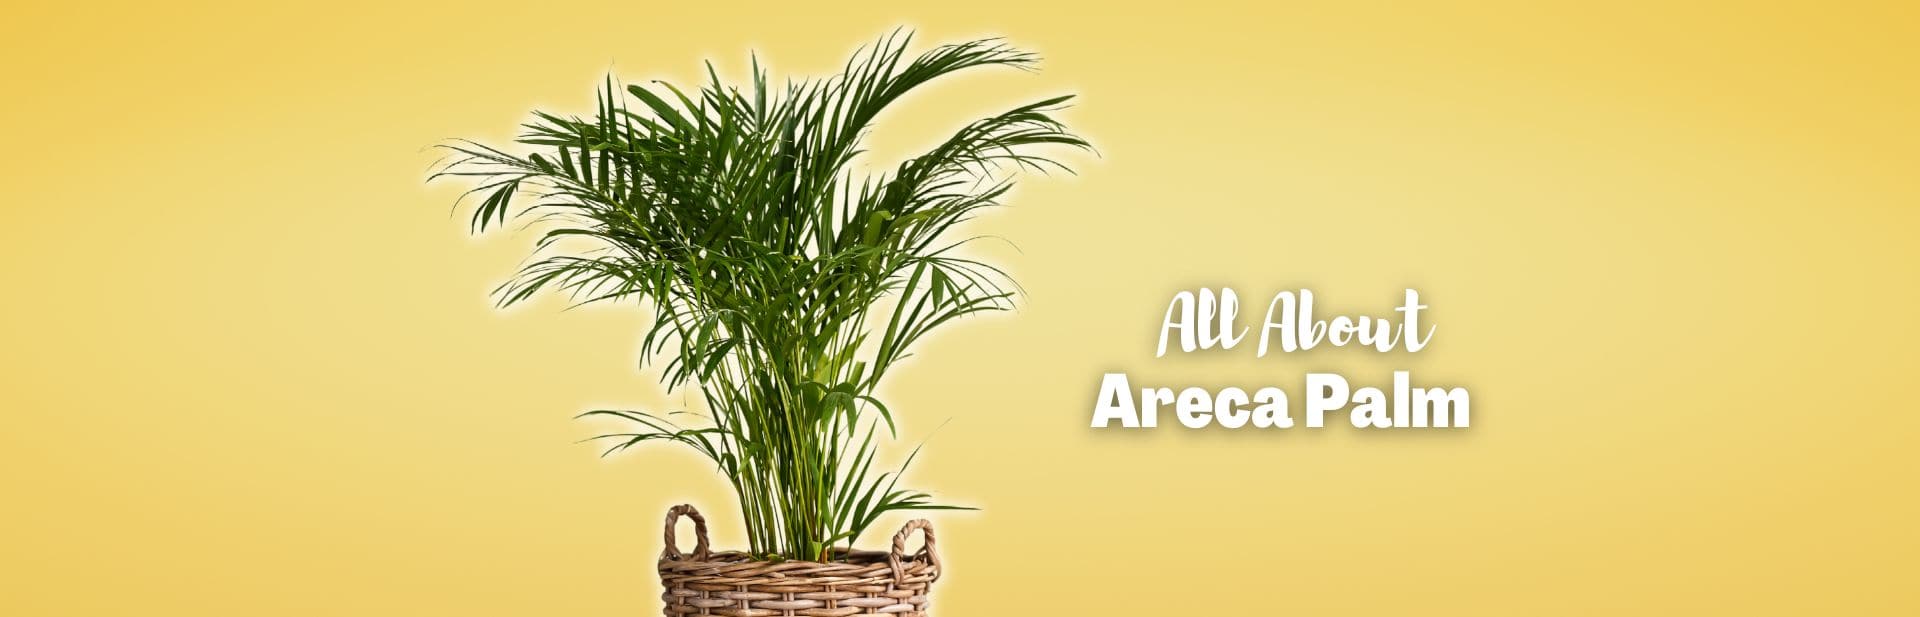 Meet the Areca Palm: Unique Beauty and Benefits